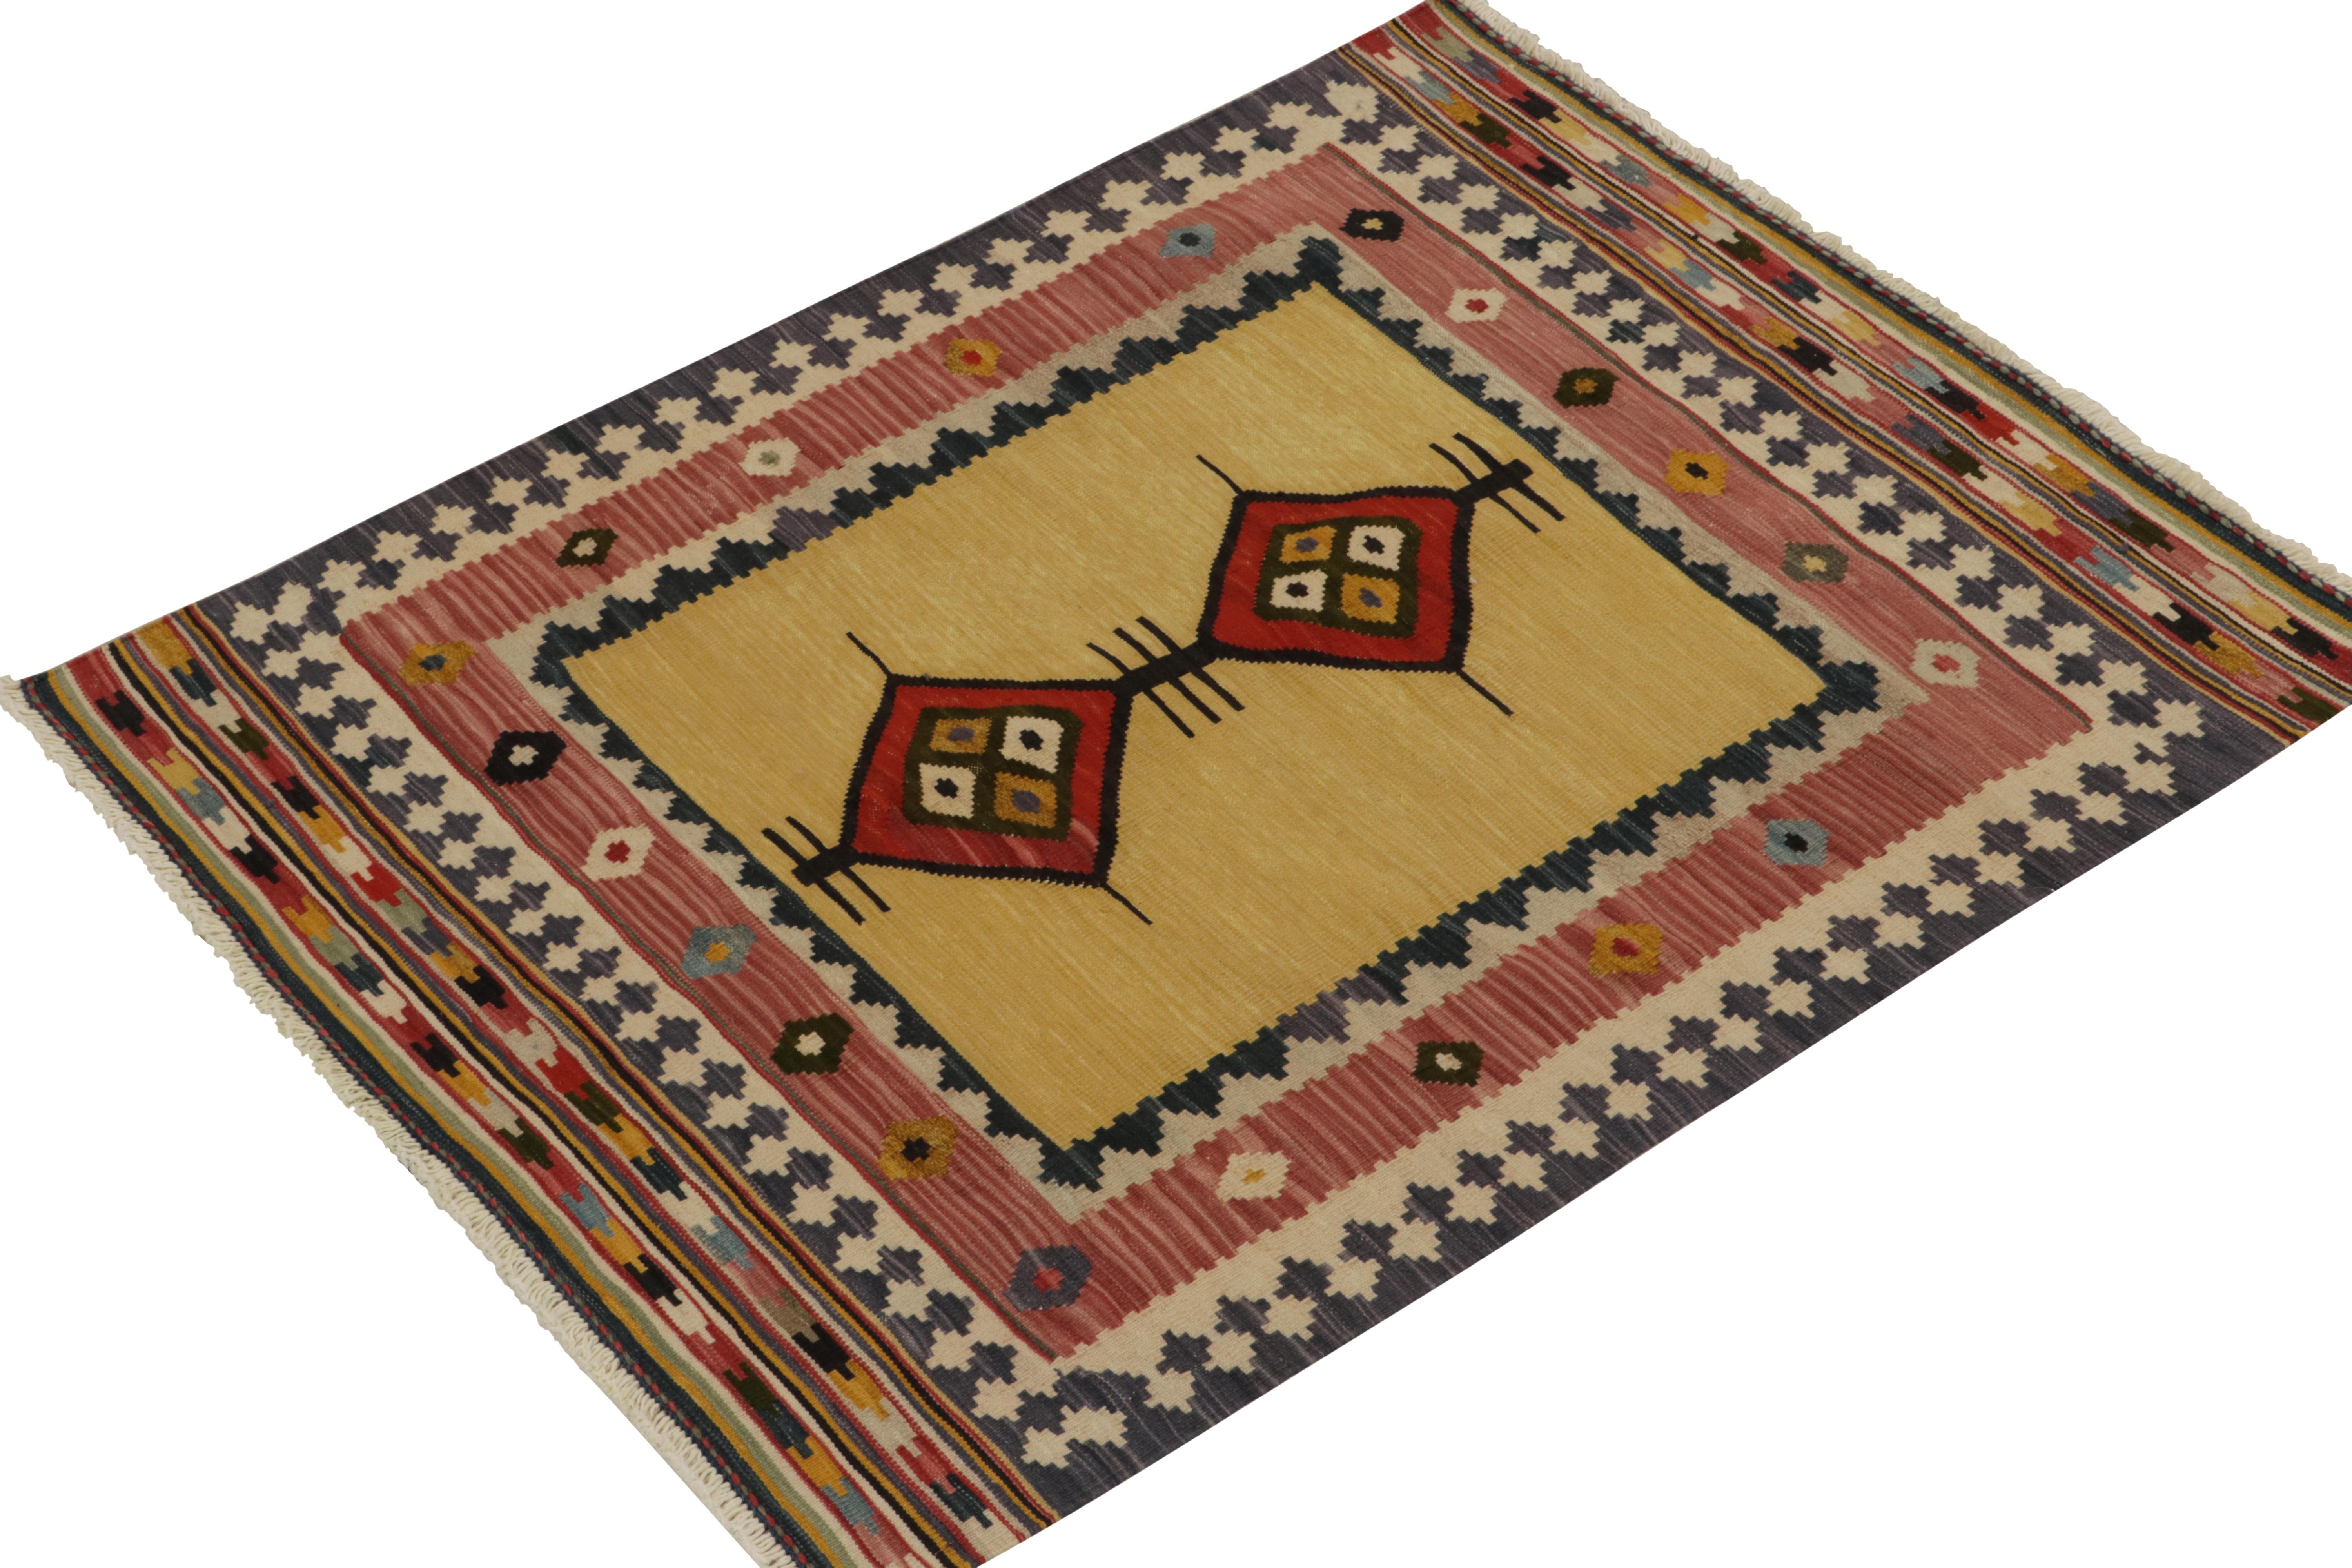 Persian Vintage Sofreh Kilim Rug in Camel, Red Medallions Tribal Borders by Rug & Kilim For Sale